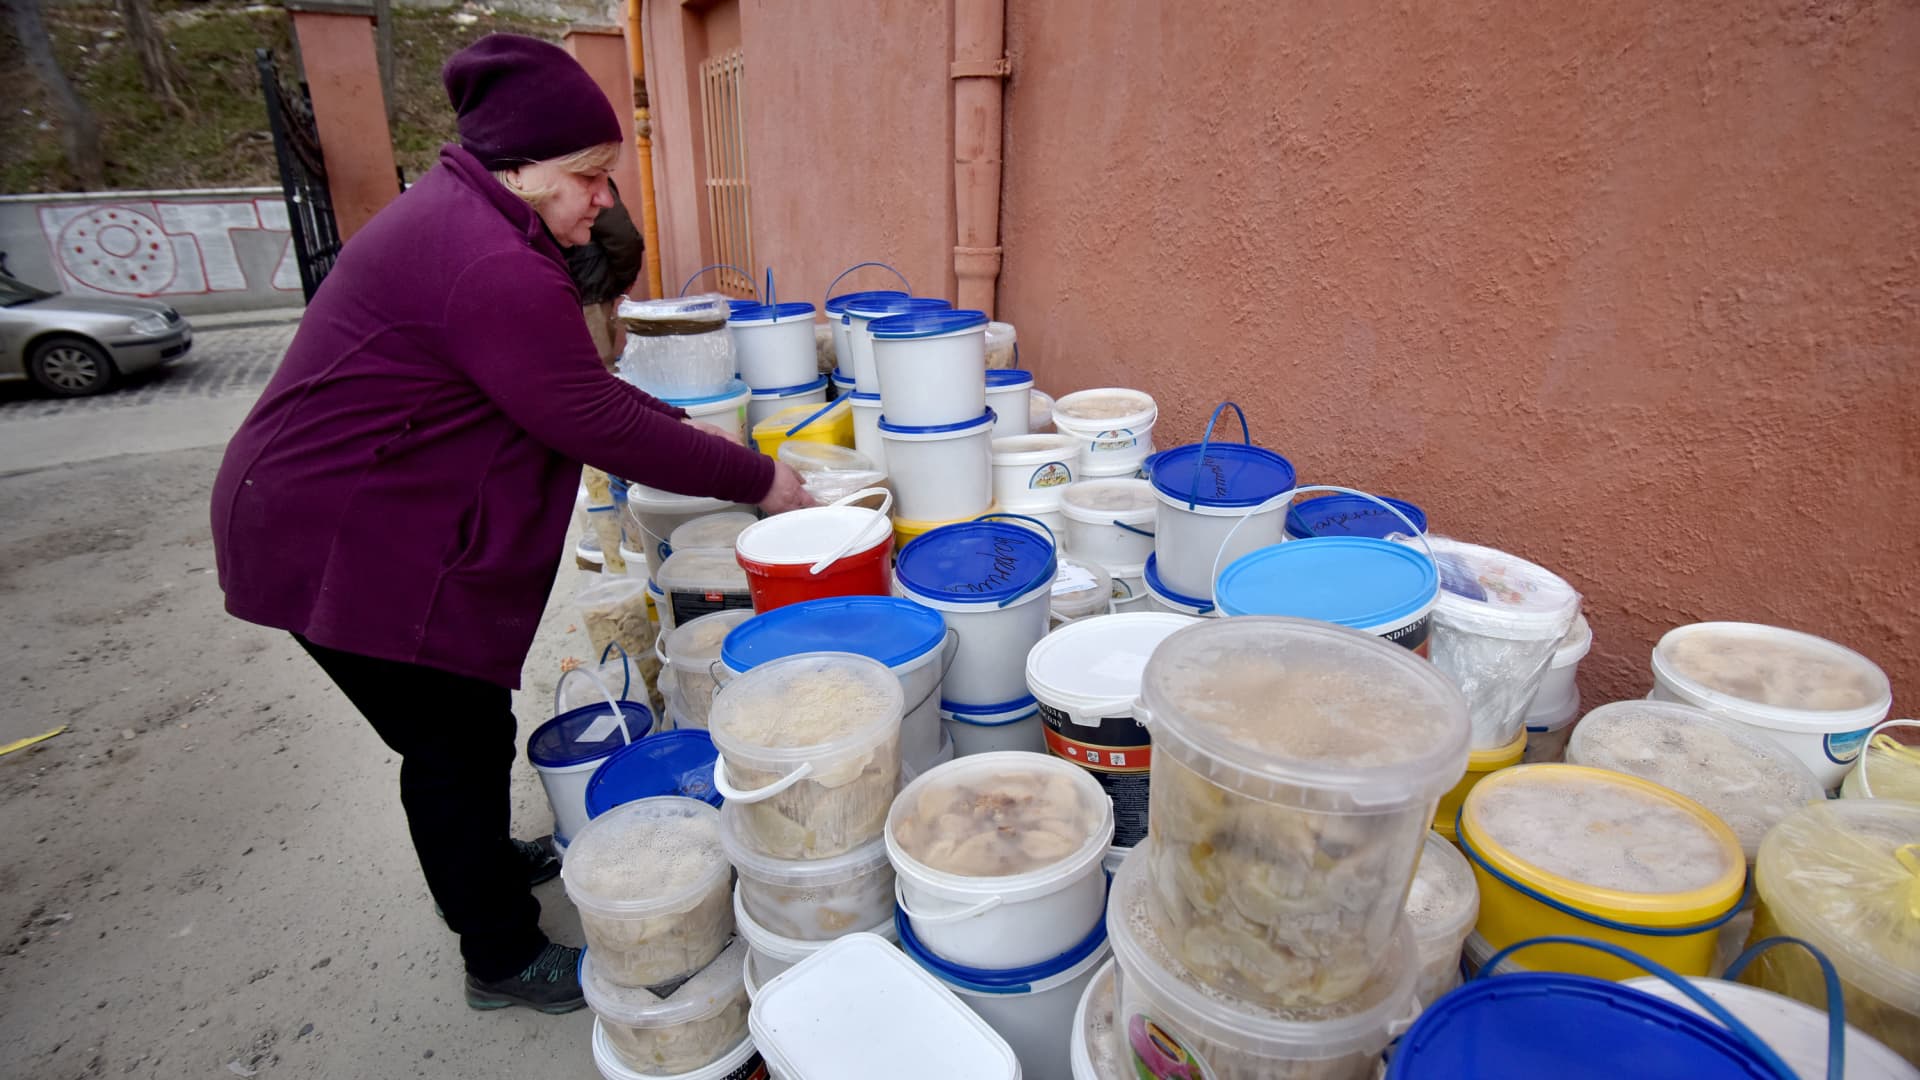 People from the Lviv Volunteer Kitchen prepare food and dry rations for the Ukrainian military on the front lines, amid Russia's invasion of Ukraine, in Lviv, Ukraine, March 9, 2022.